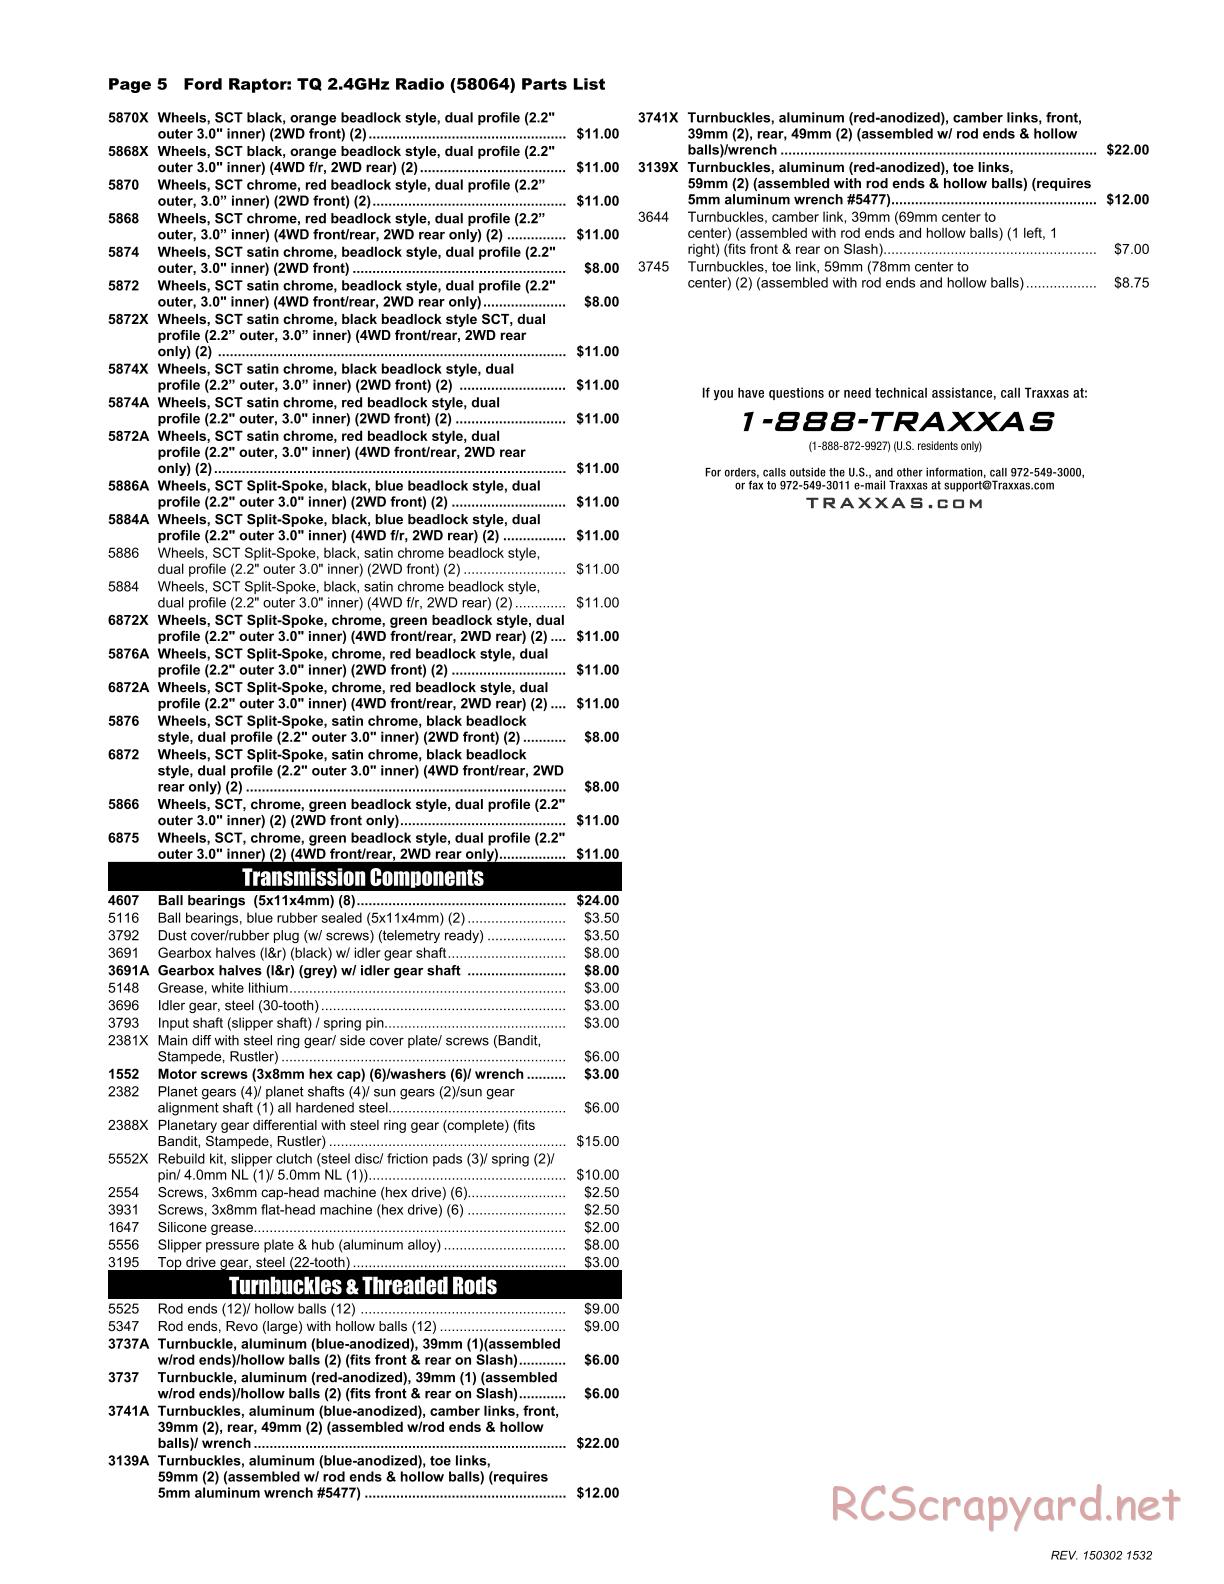 Traxxas - Ford F-150 SVT Raptor (2013) - Parts List - Page 5